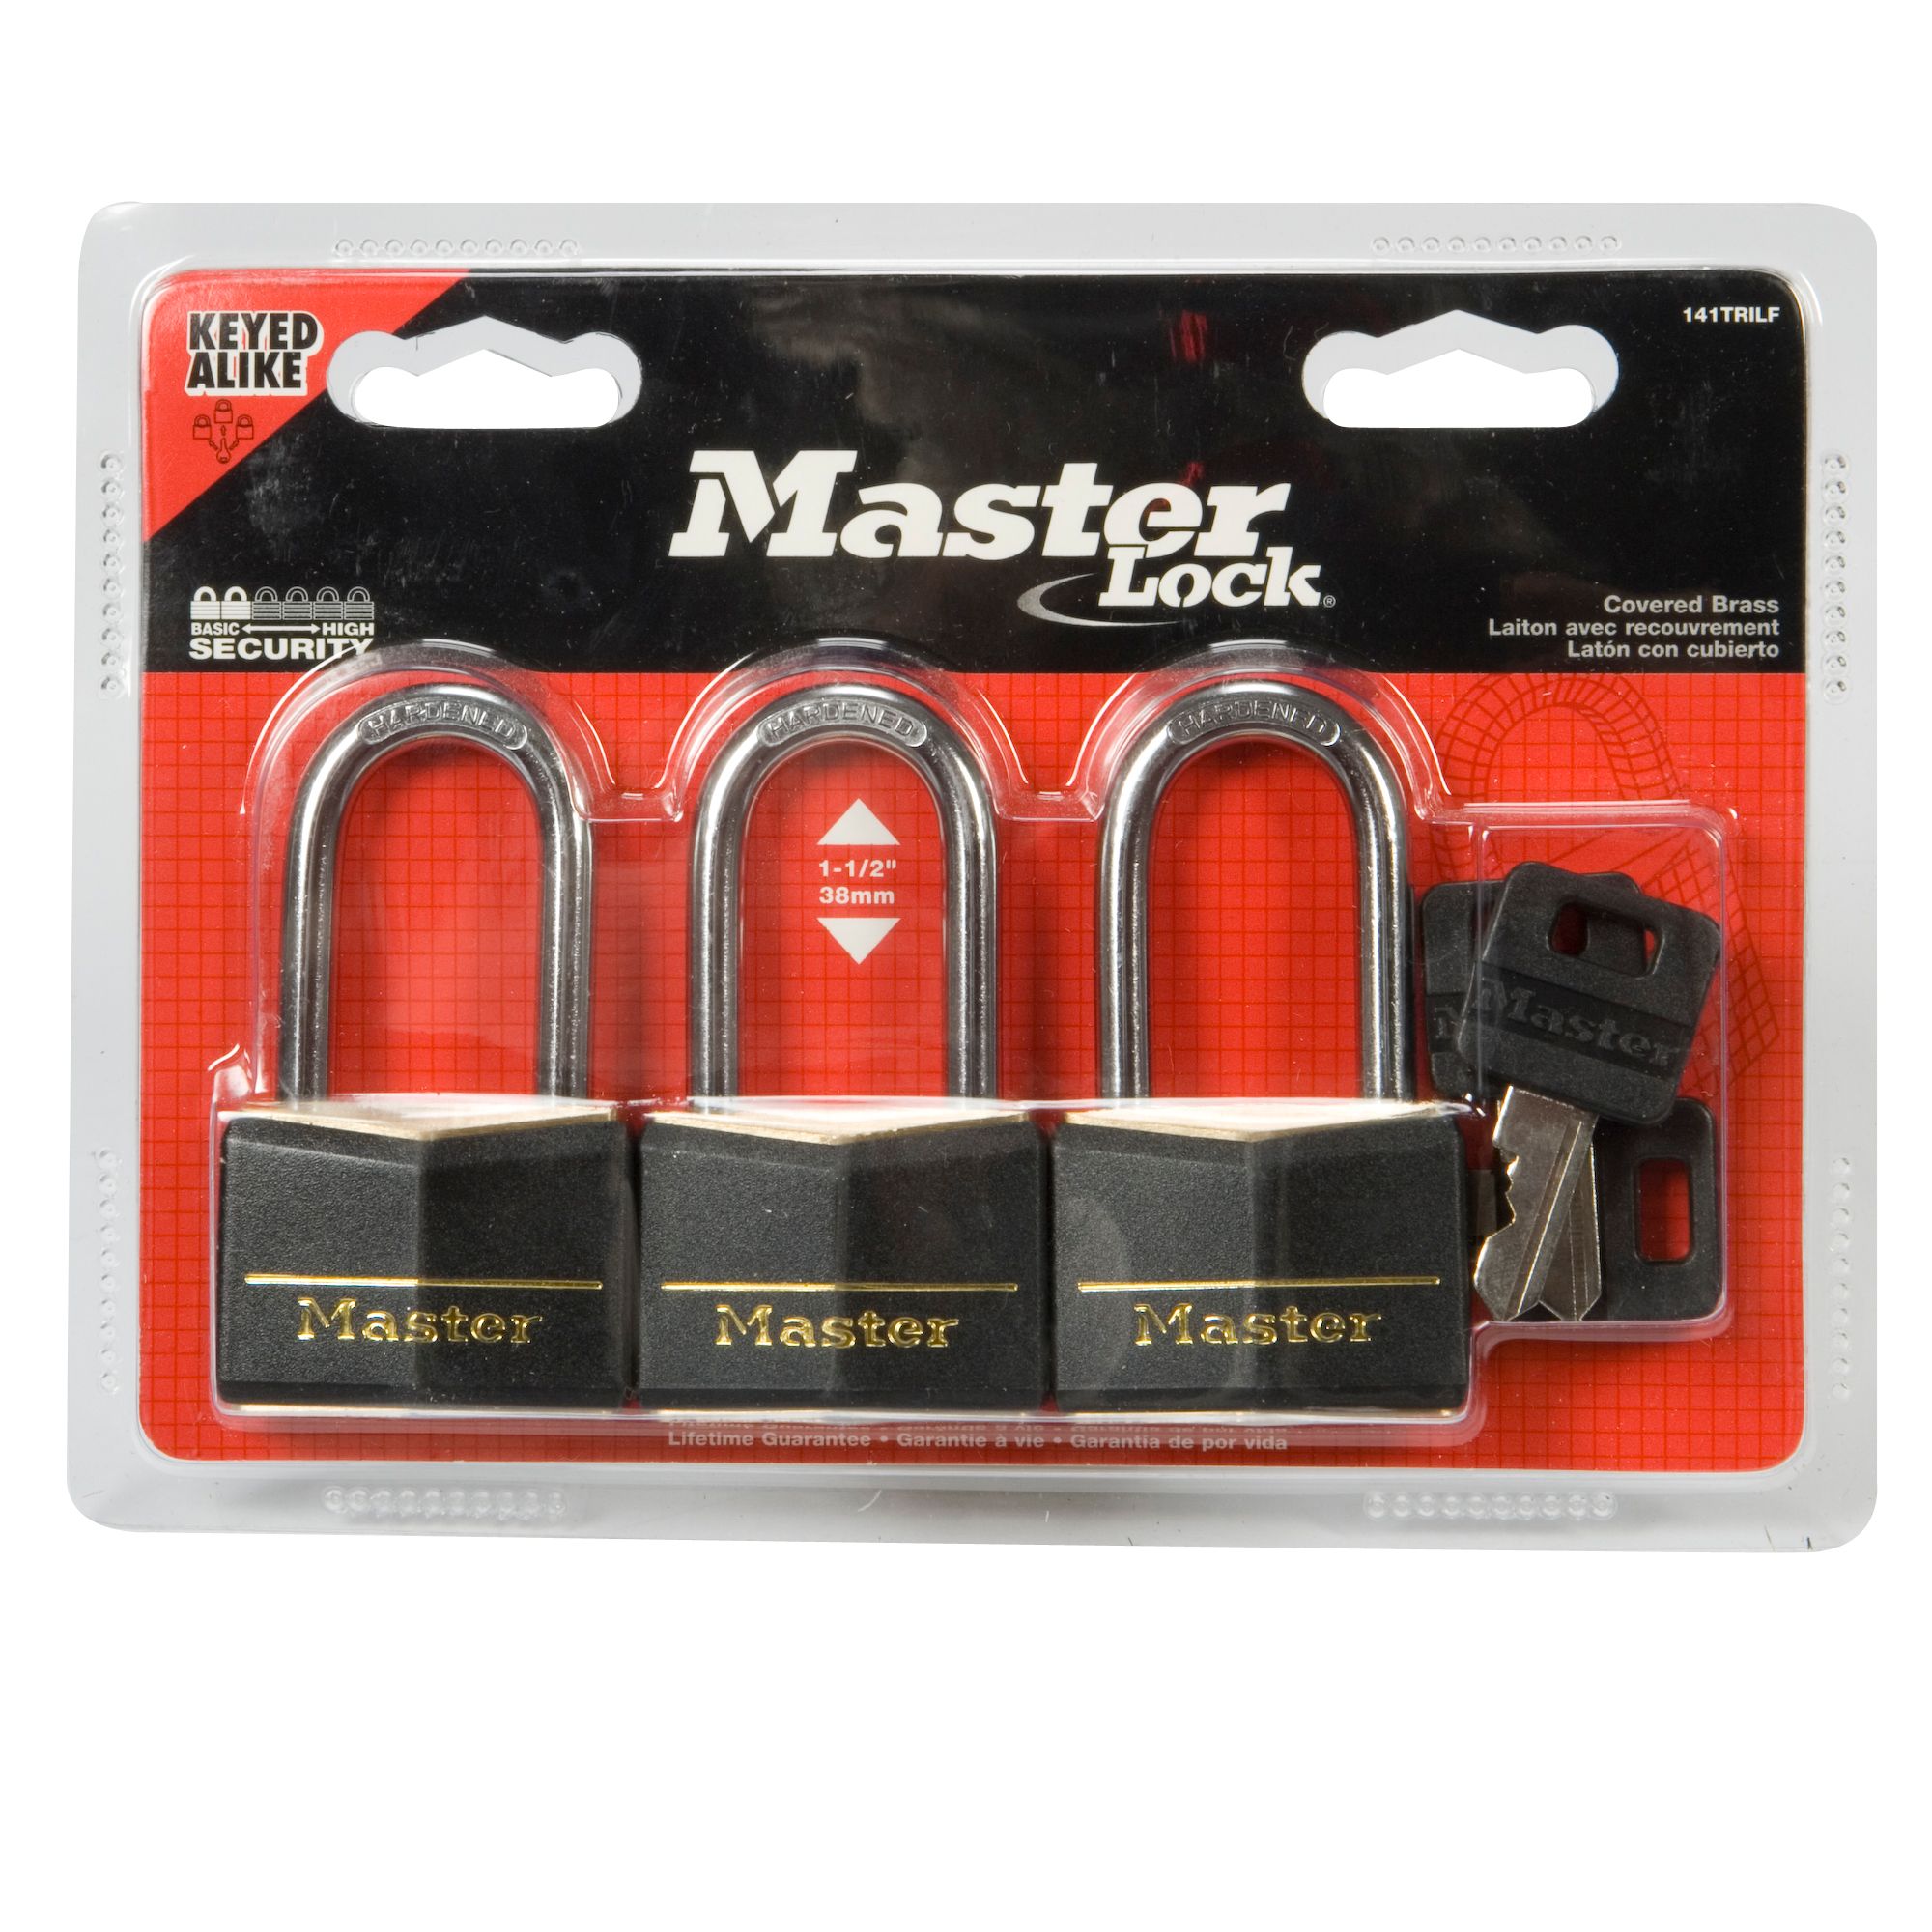 Master Lock 1 9/16in Covered Brass Locks with 1/2in Shackle